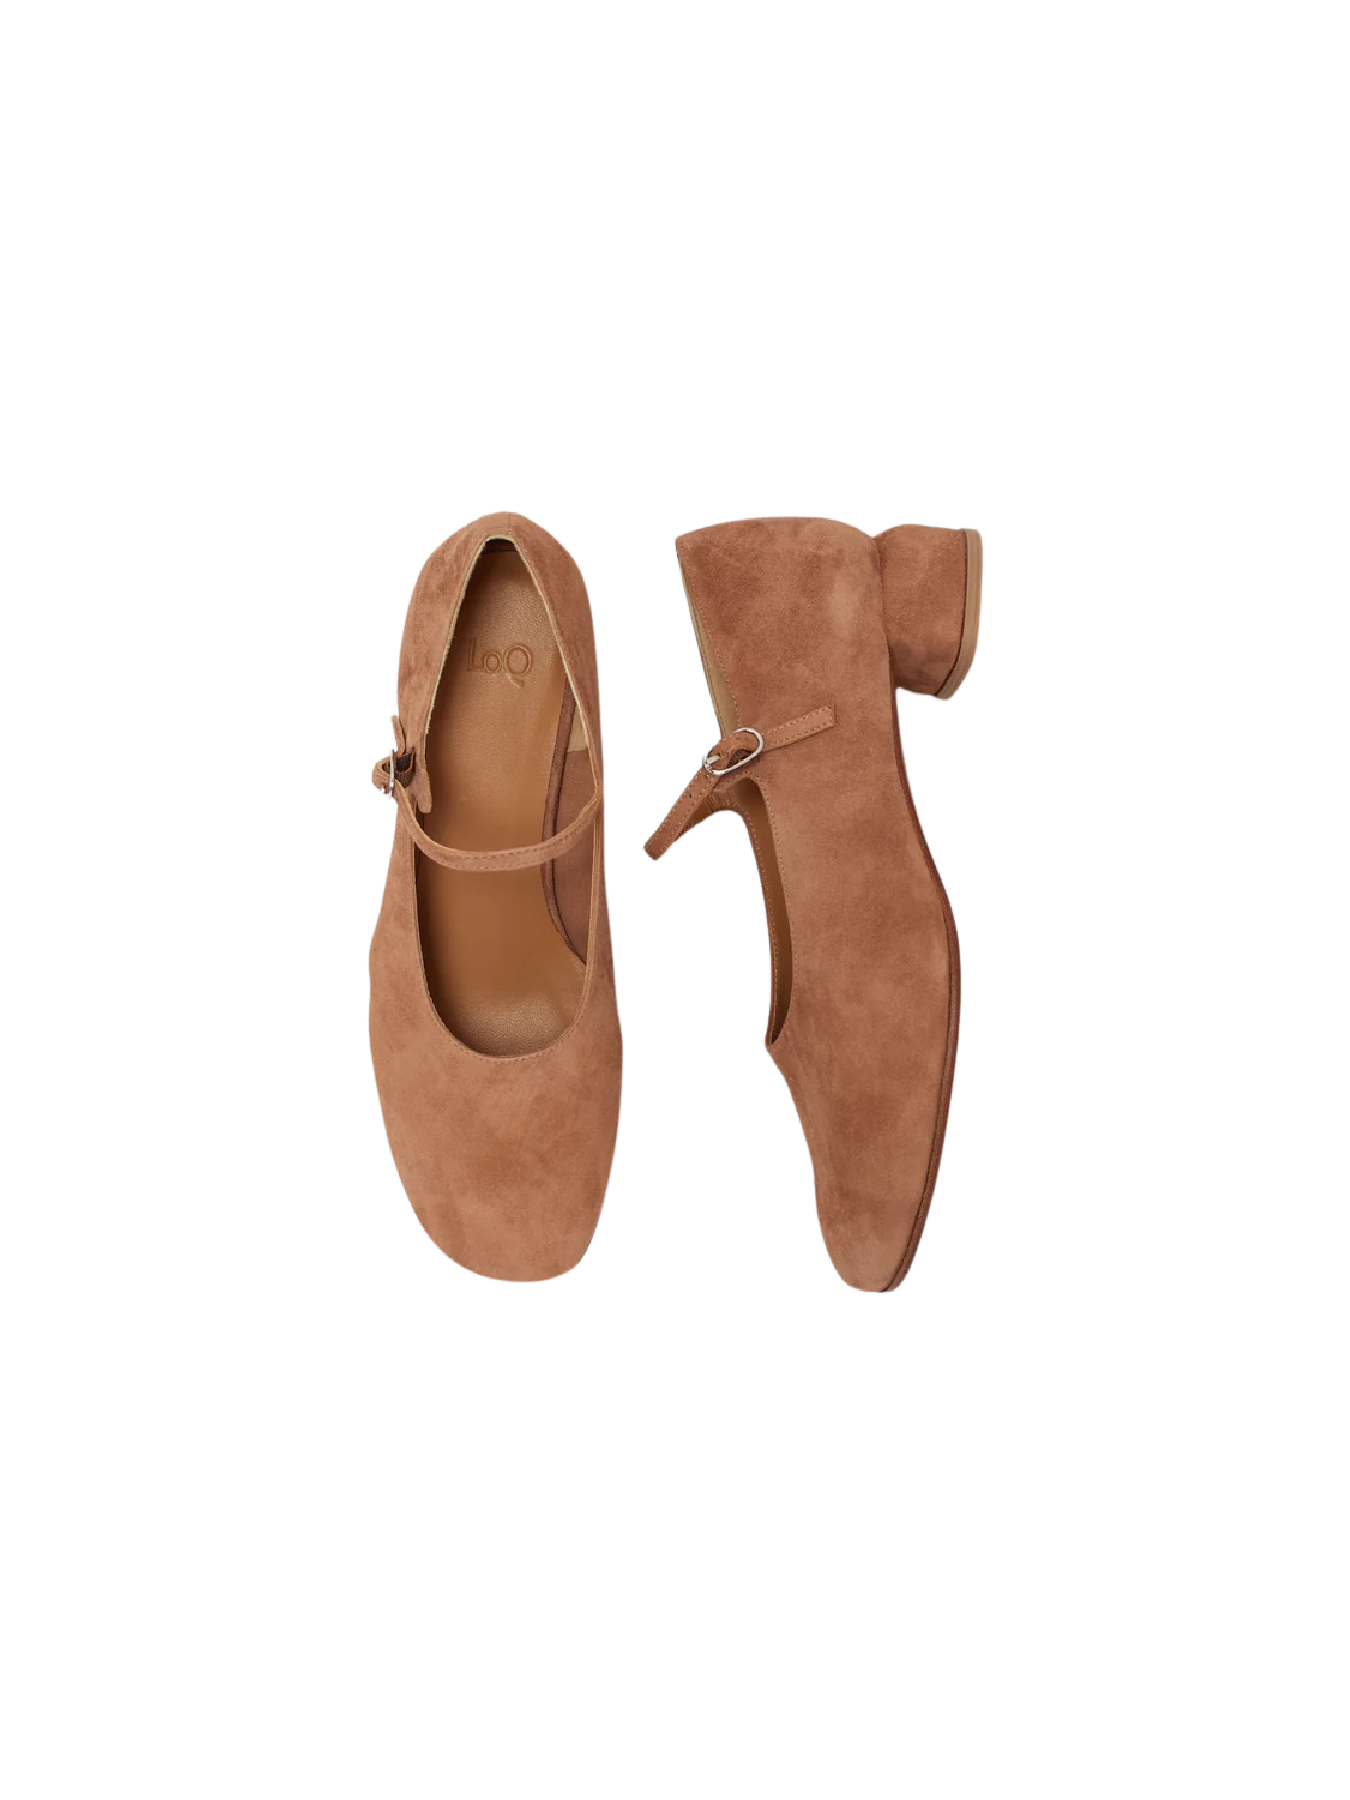 LoQ Ema Mary Jane in Clay Suede